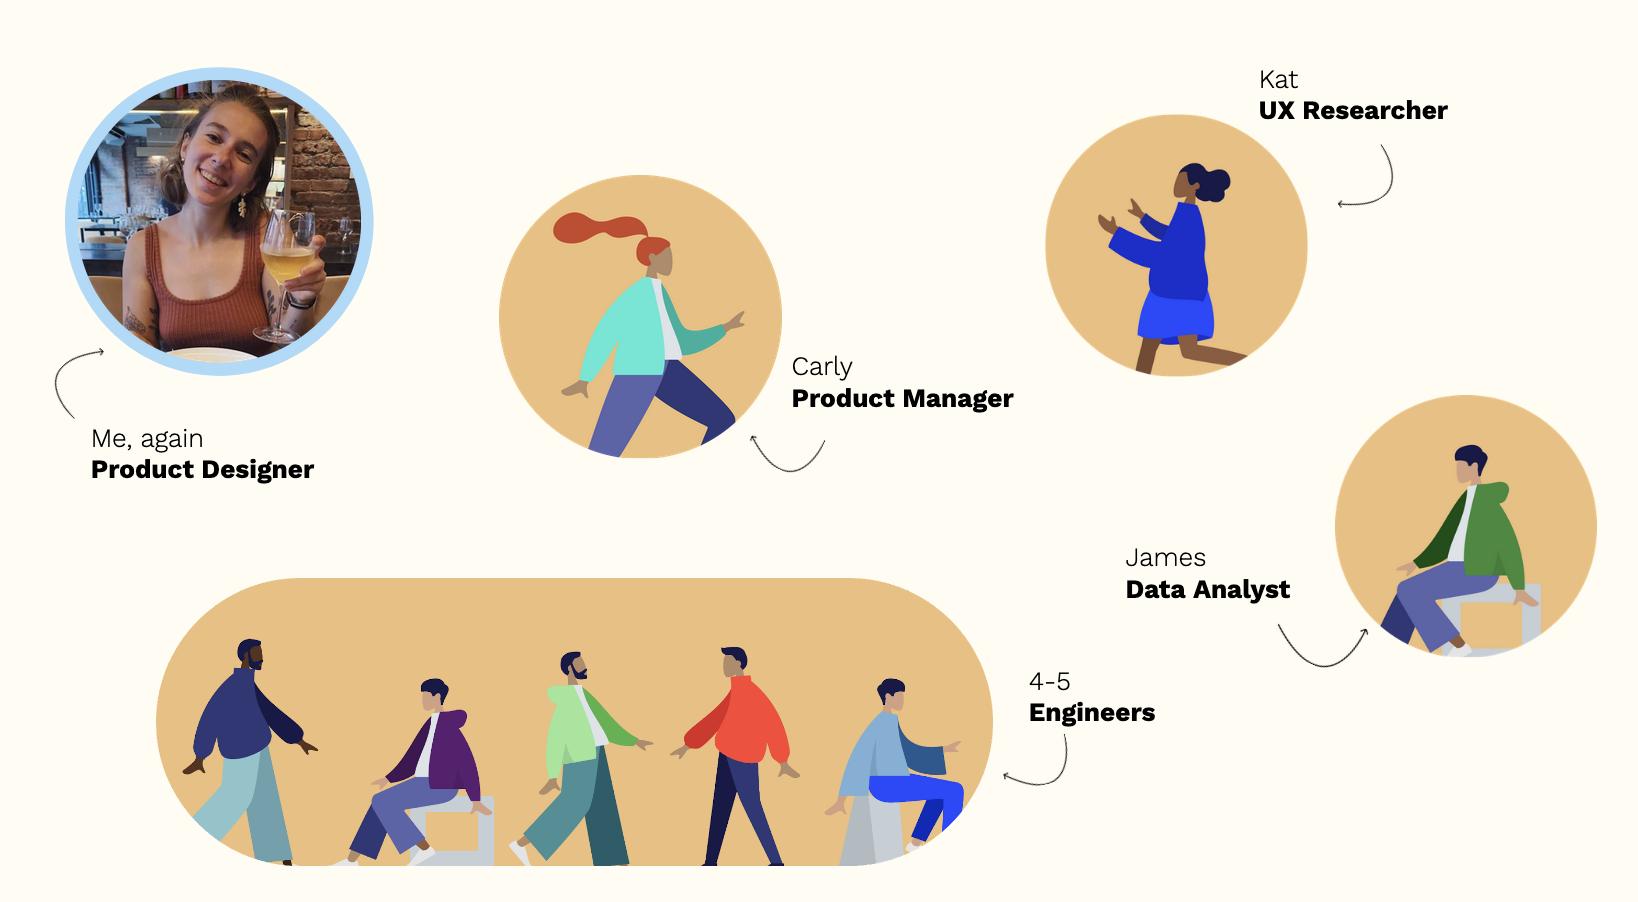 The team: me, a PM, a data analyst, a UX researcher, and a team of engineers